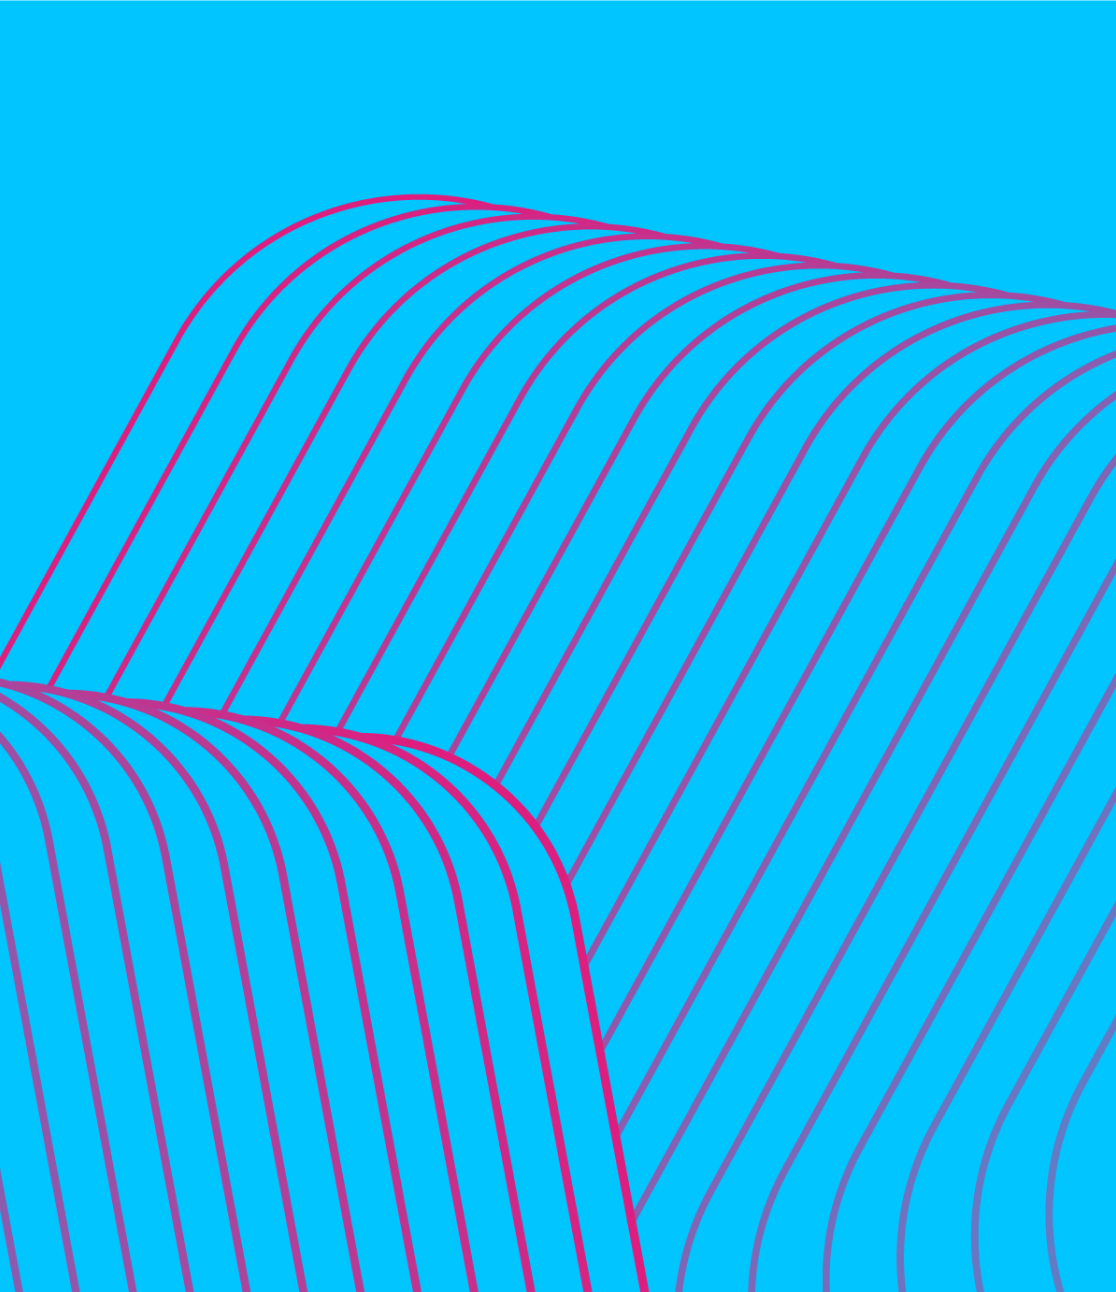 A digital rendering of magenta parallel lines that bend and curve over a light blue background.